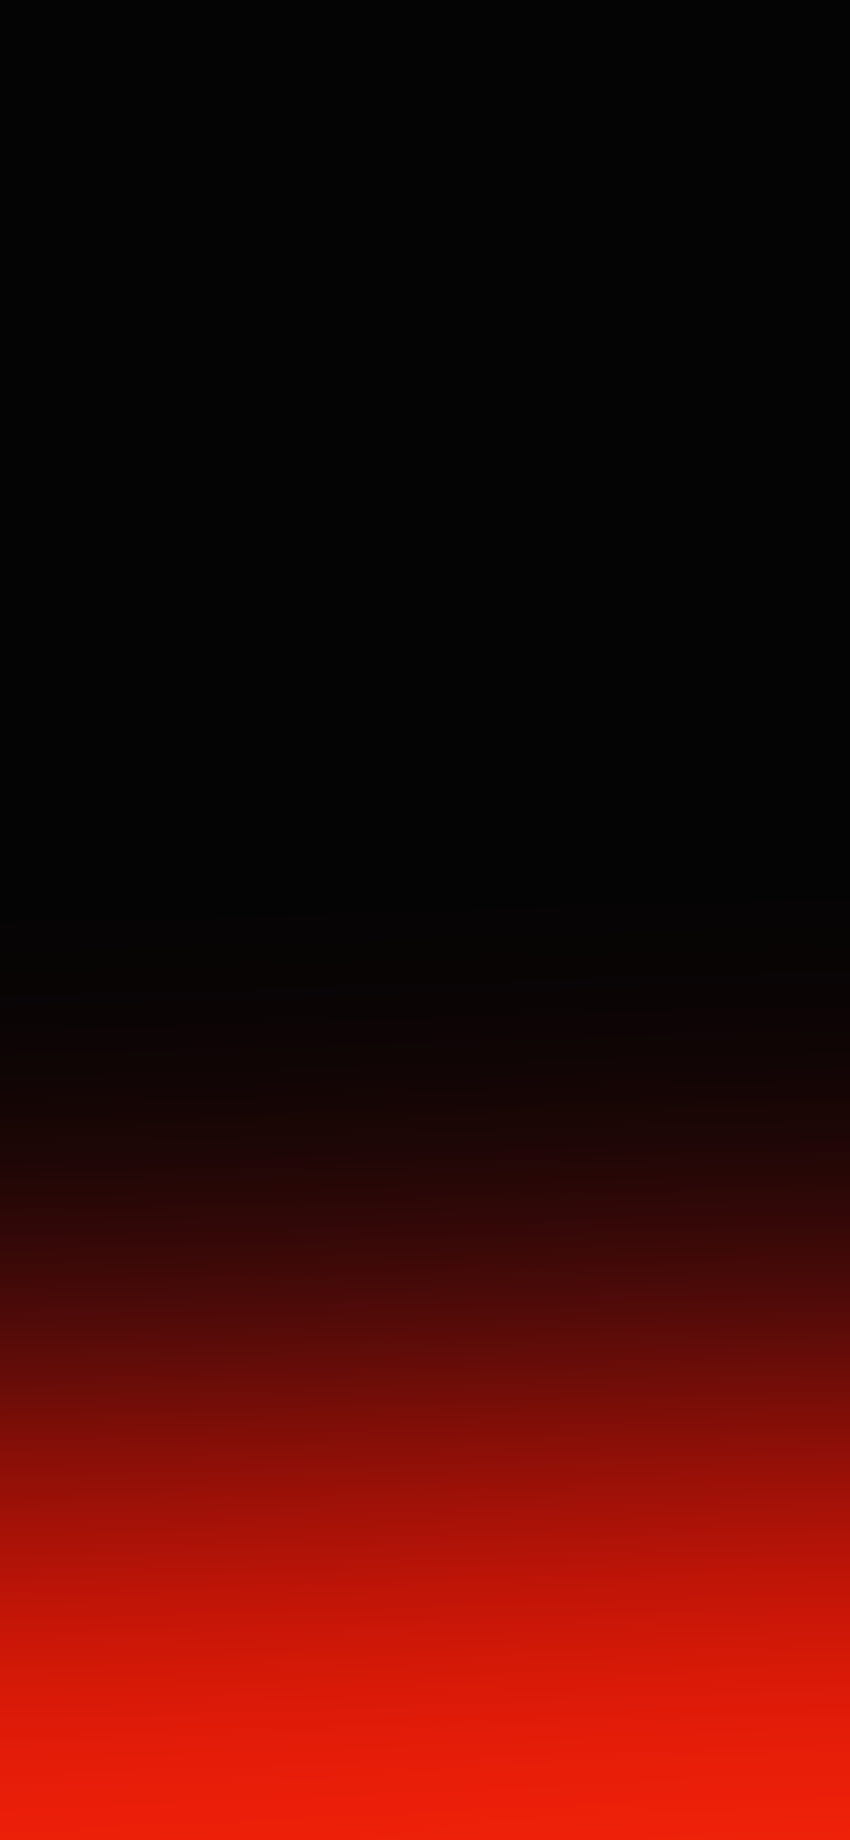 Gradient colors for iPhone X, 8, 7, 6, Red Gradient HD phone wallpaper